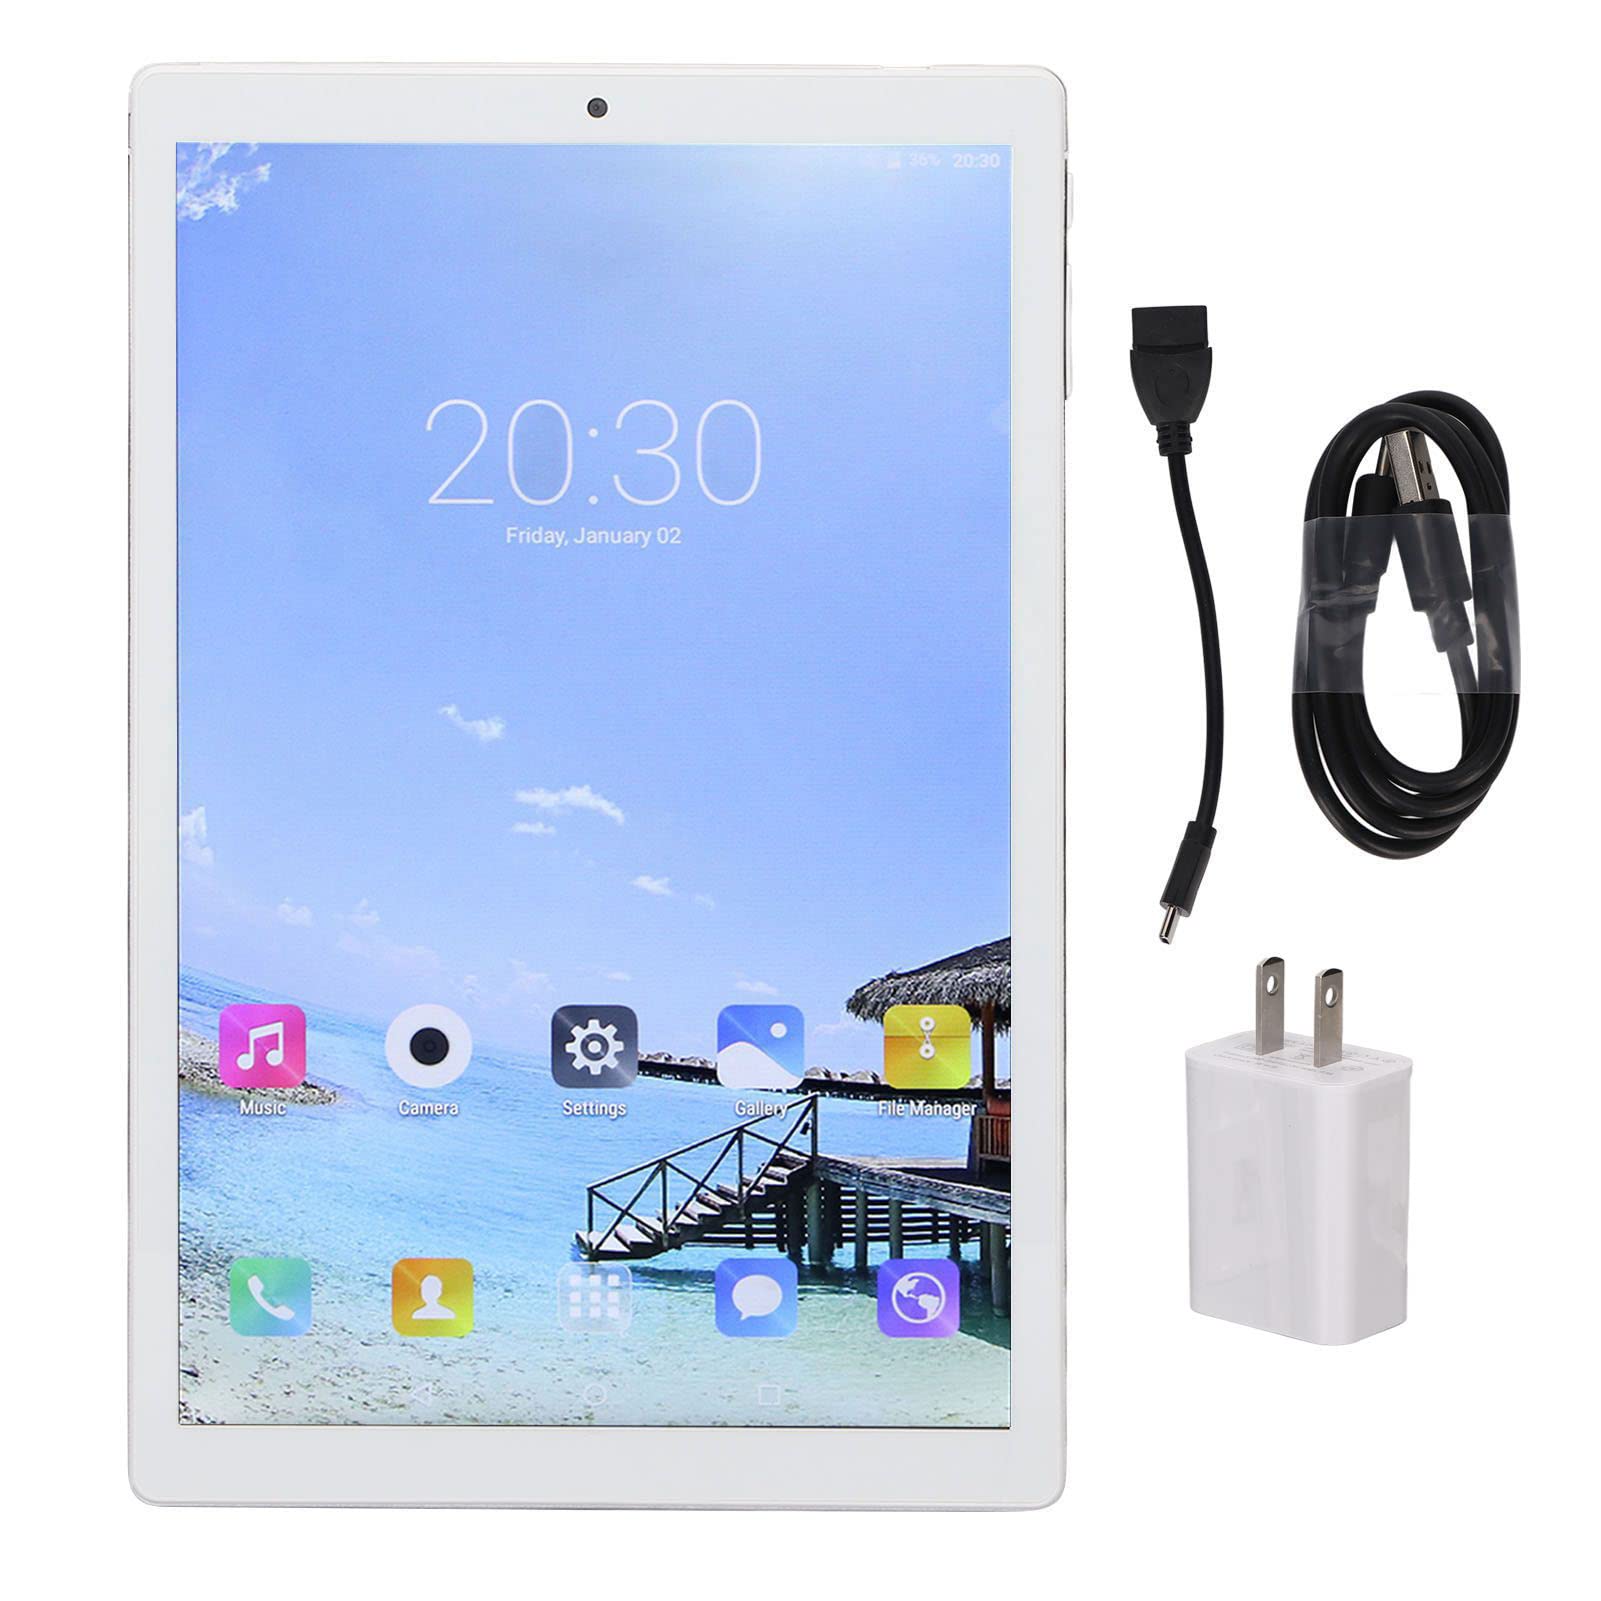 ciciglow 10.1 Inch Tablet, 2GB RAM 32GB ROM, 1280x800 HD IPS Display, Octa Core Processor, 2 MP+5 MP Camera, 6000MAh, 2.4G 5G Dual Band WiFi, GPS, for Android 12 (White)